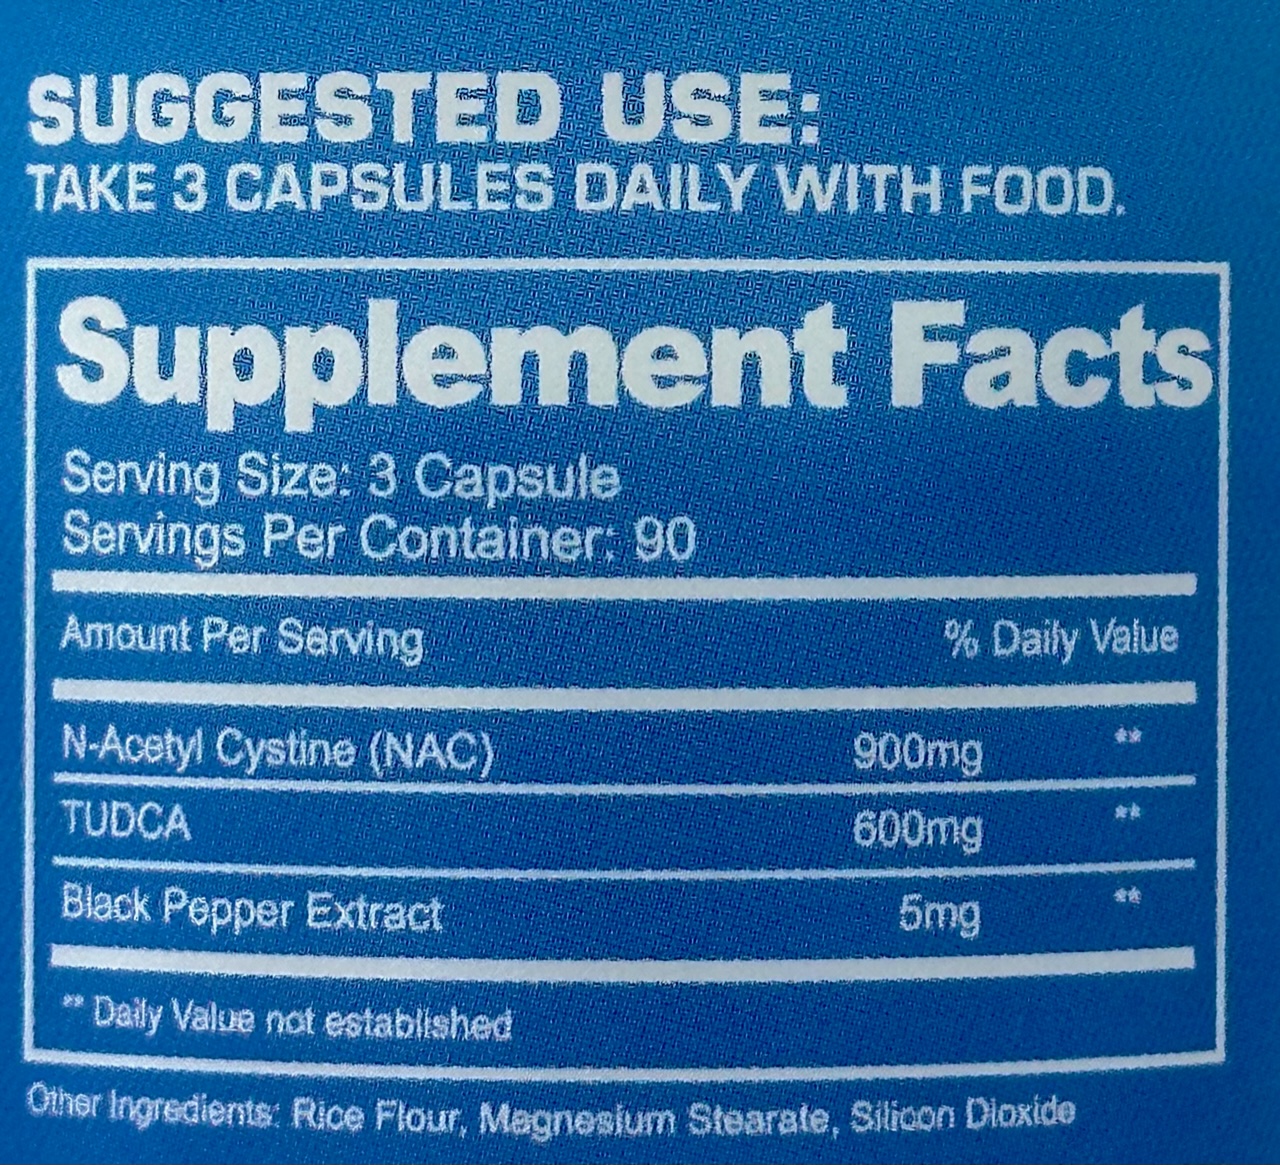 Supplement use directions and facts: 3 capsules daily, each serving contains 900mg N-Acetyl Cystine, 600mg TUDCA, 5mg Black Pepper Extract.